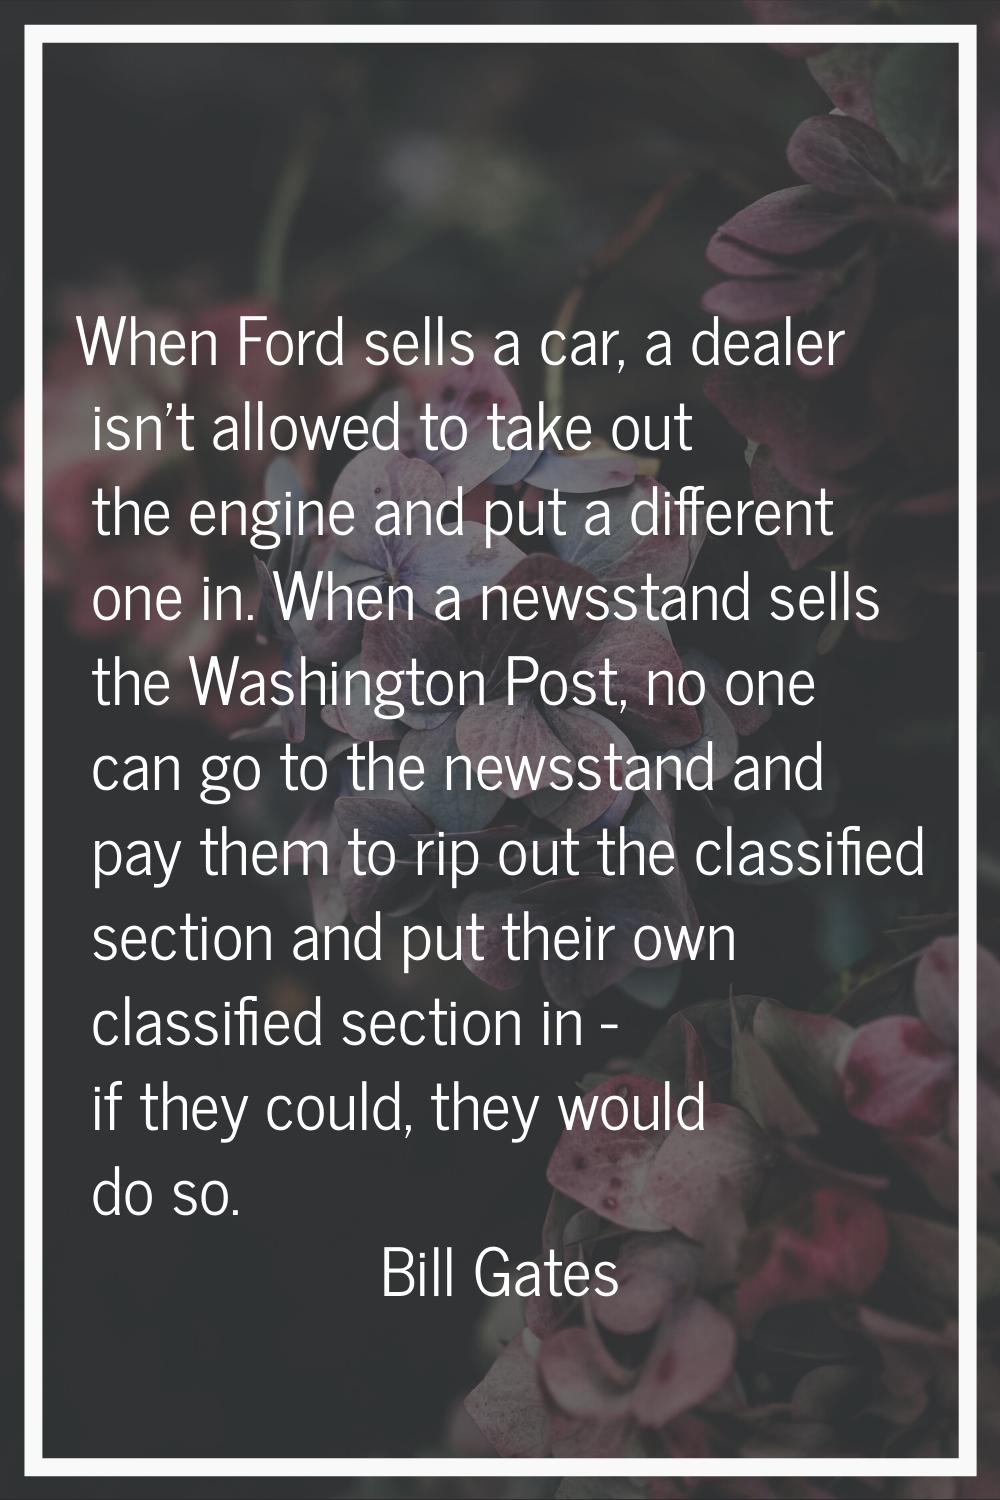 When Ford sells a car, a dealer isn't allowed to take out the engine and put a different one in. Wh